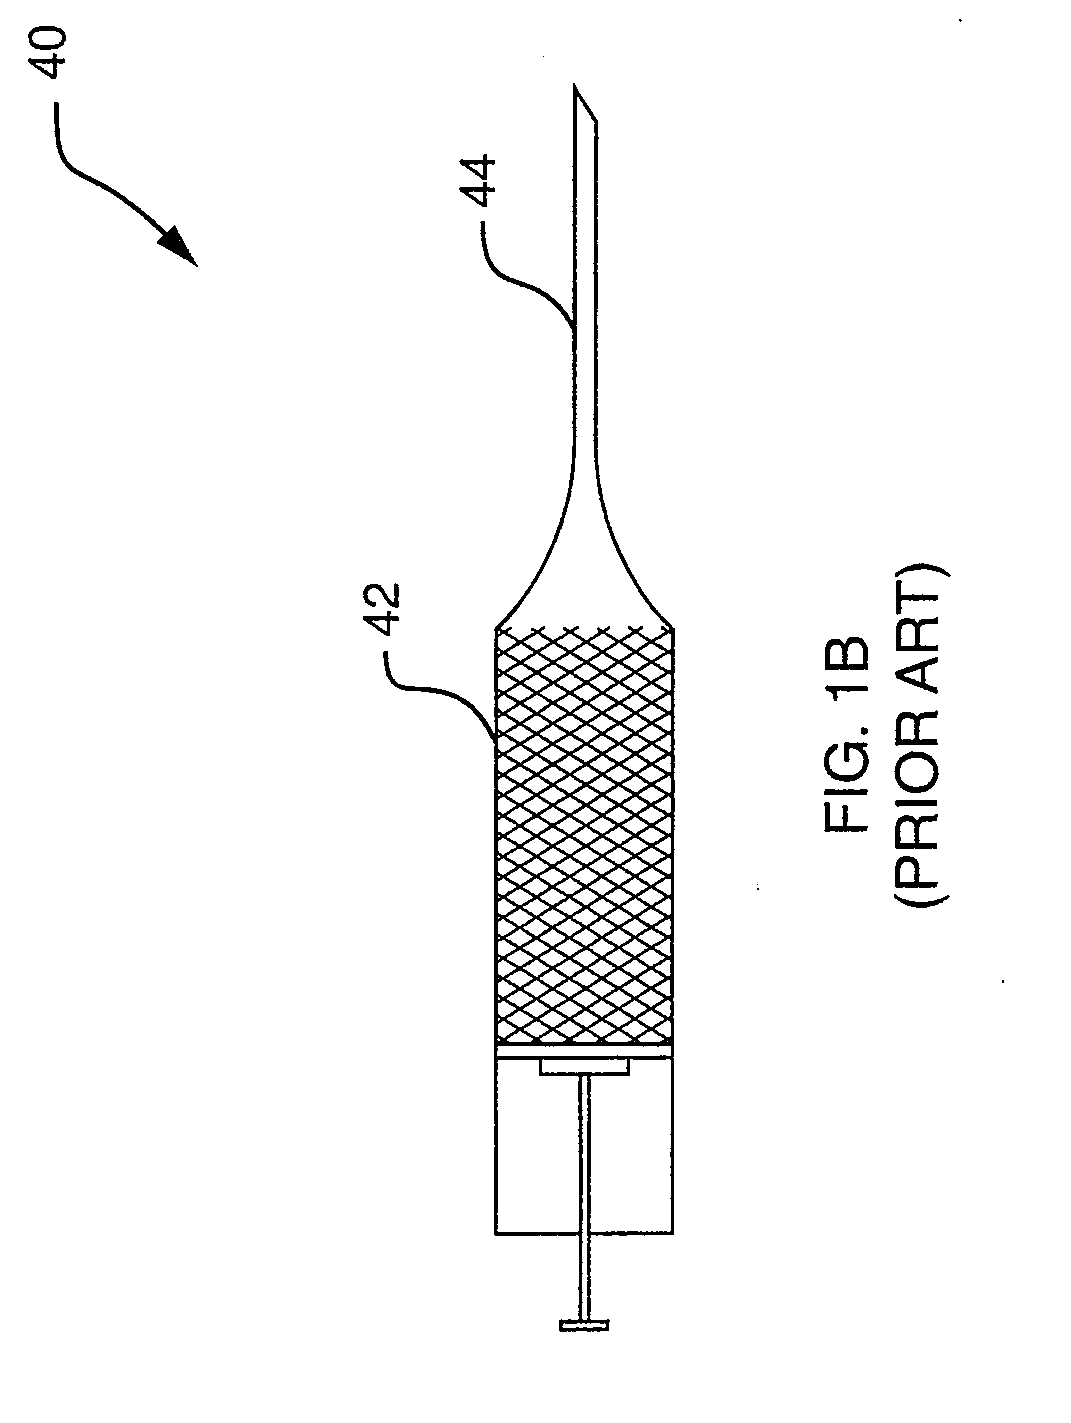 Remotely-activated vertebroplasty injection device